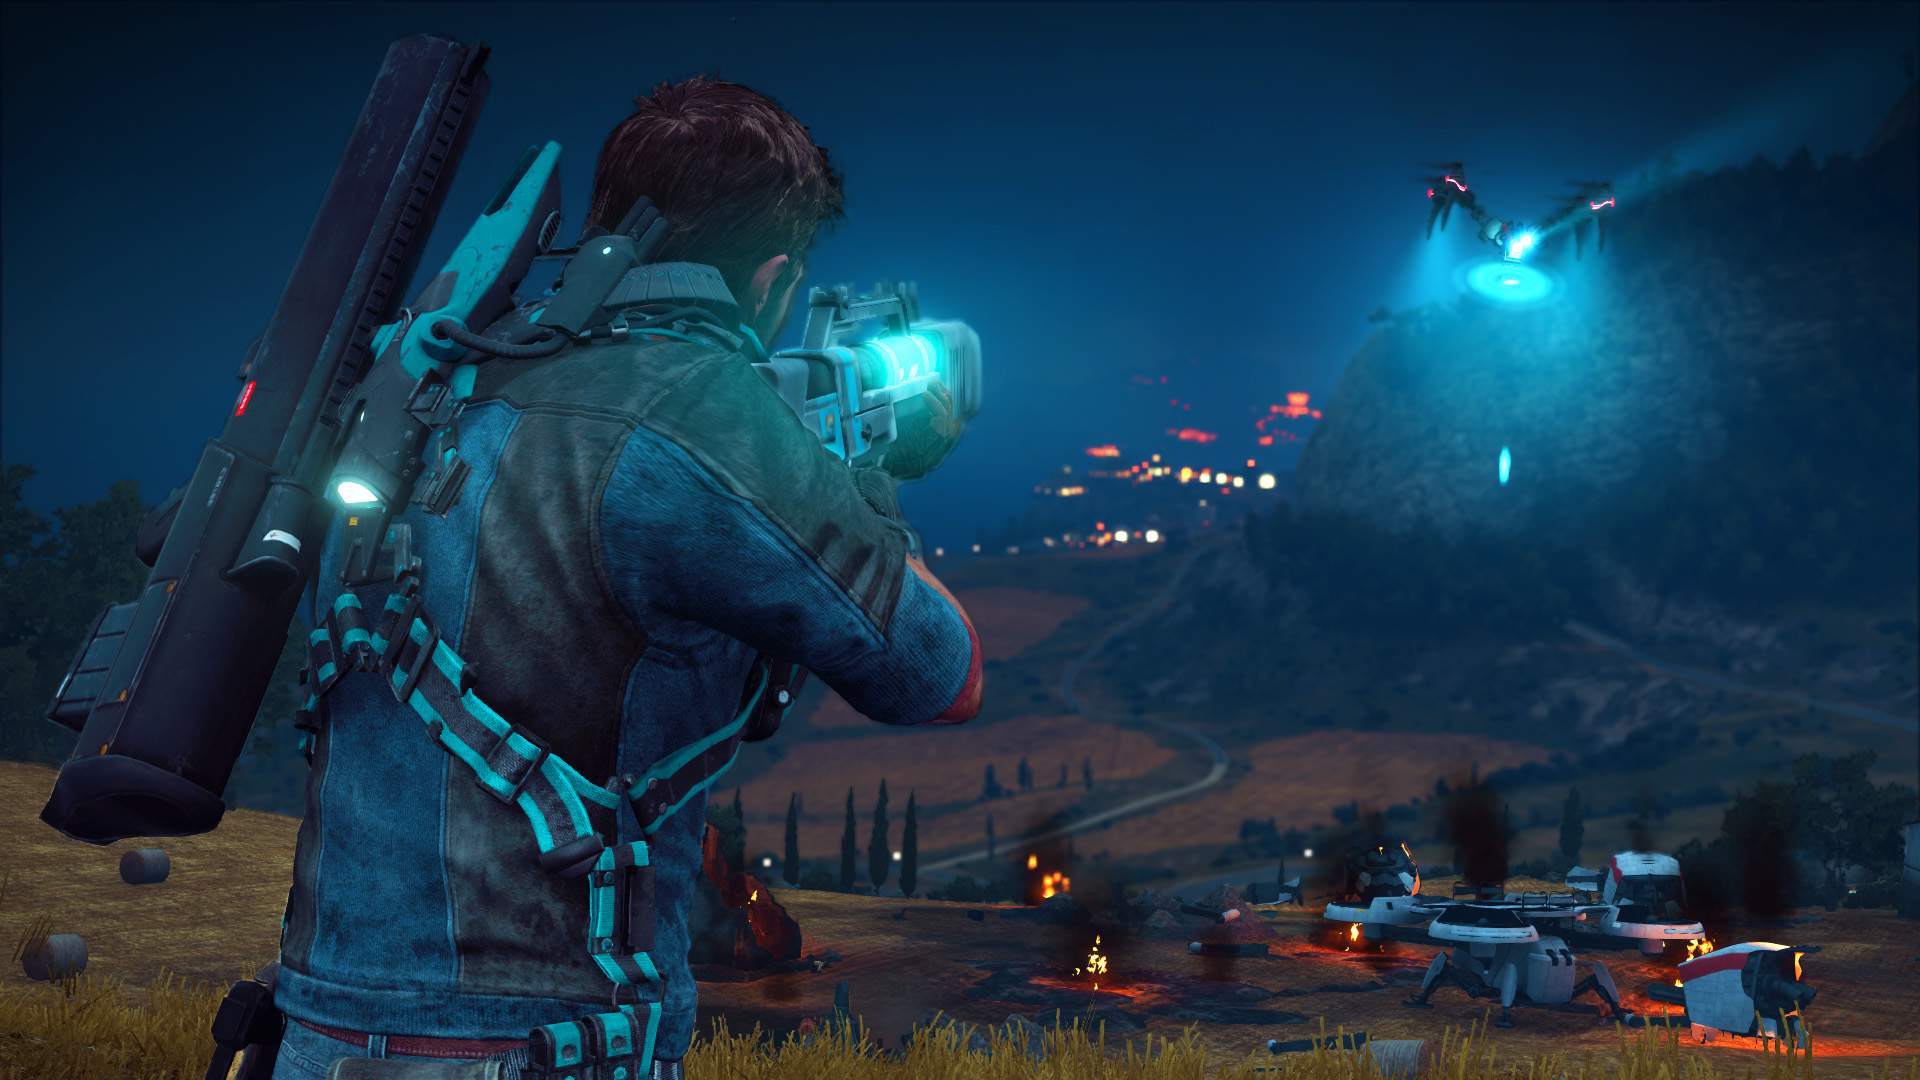 Rico Rodriguez aiming a weapon at an enemy drone